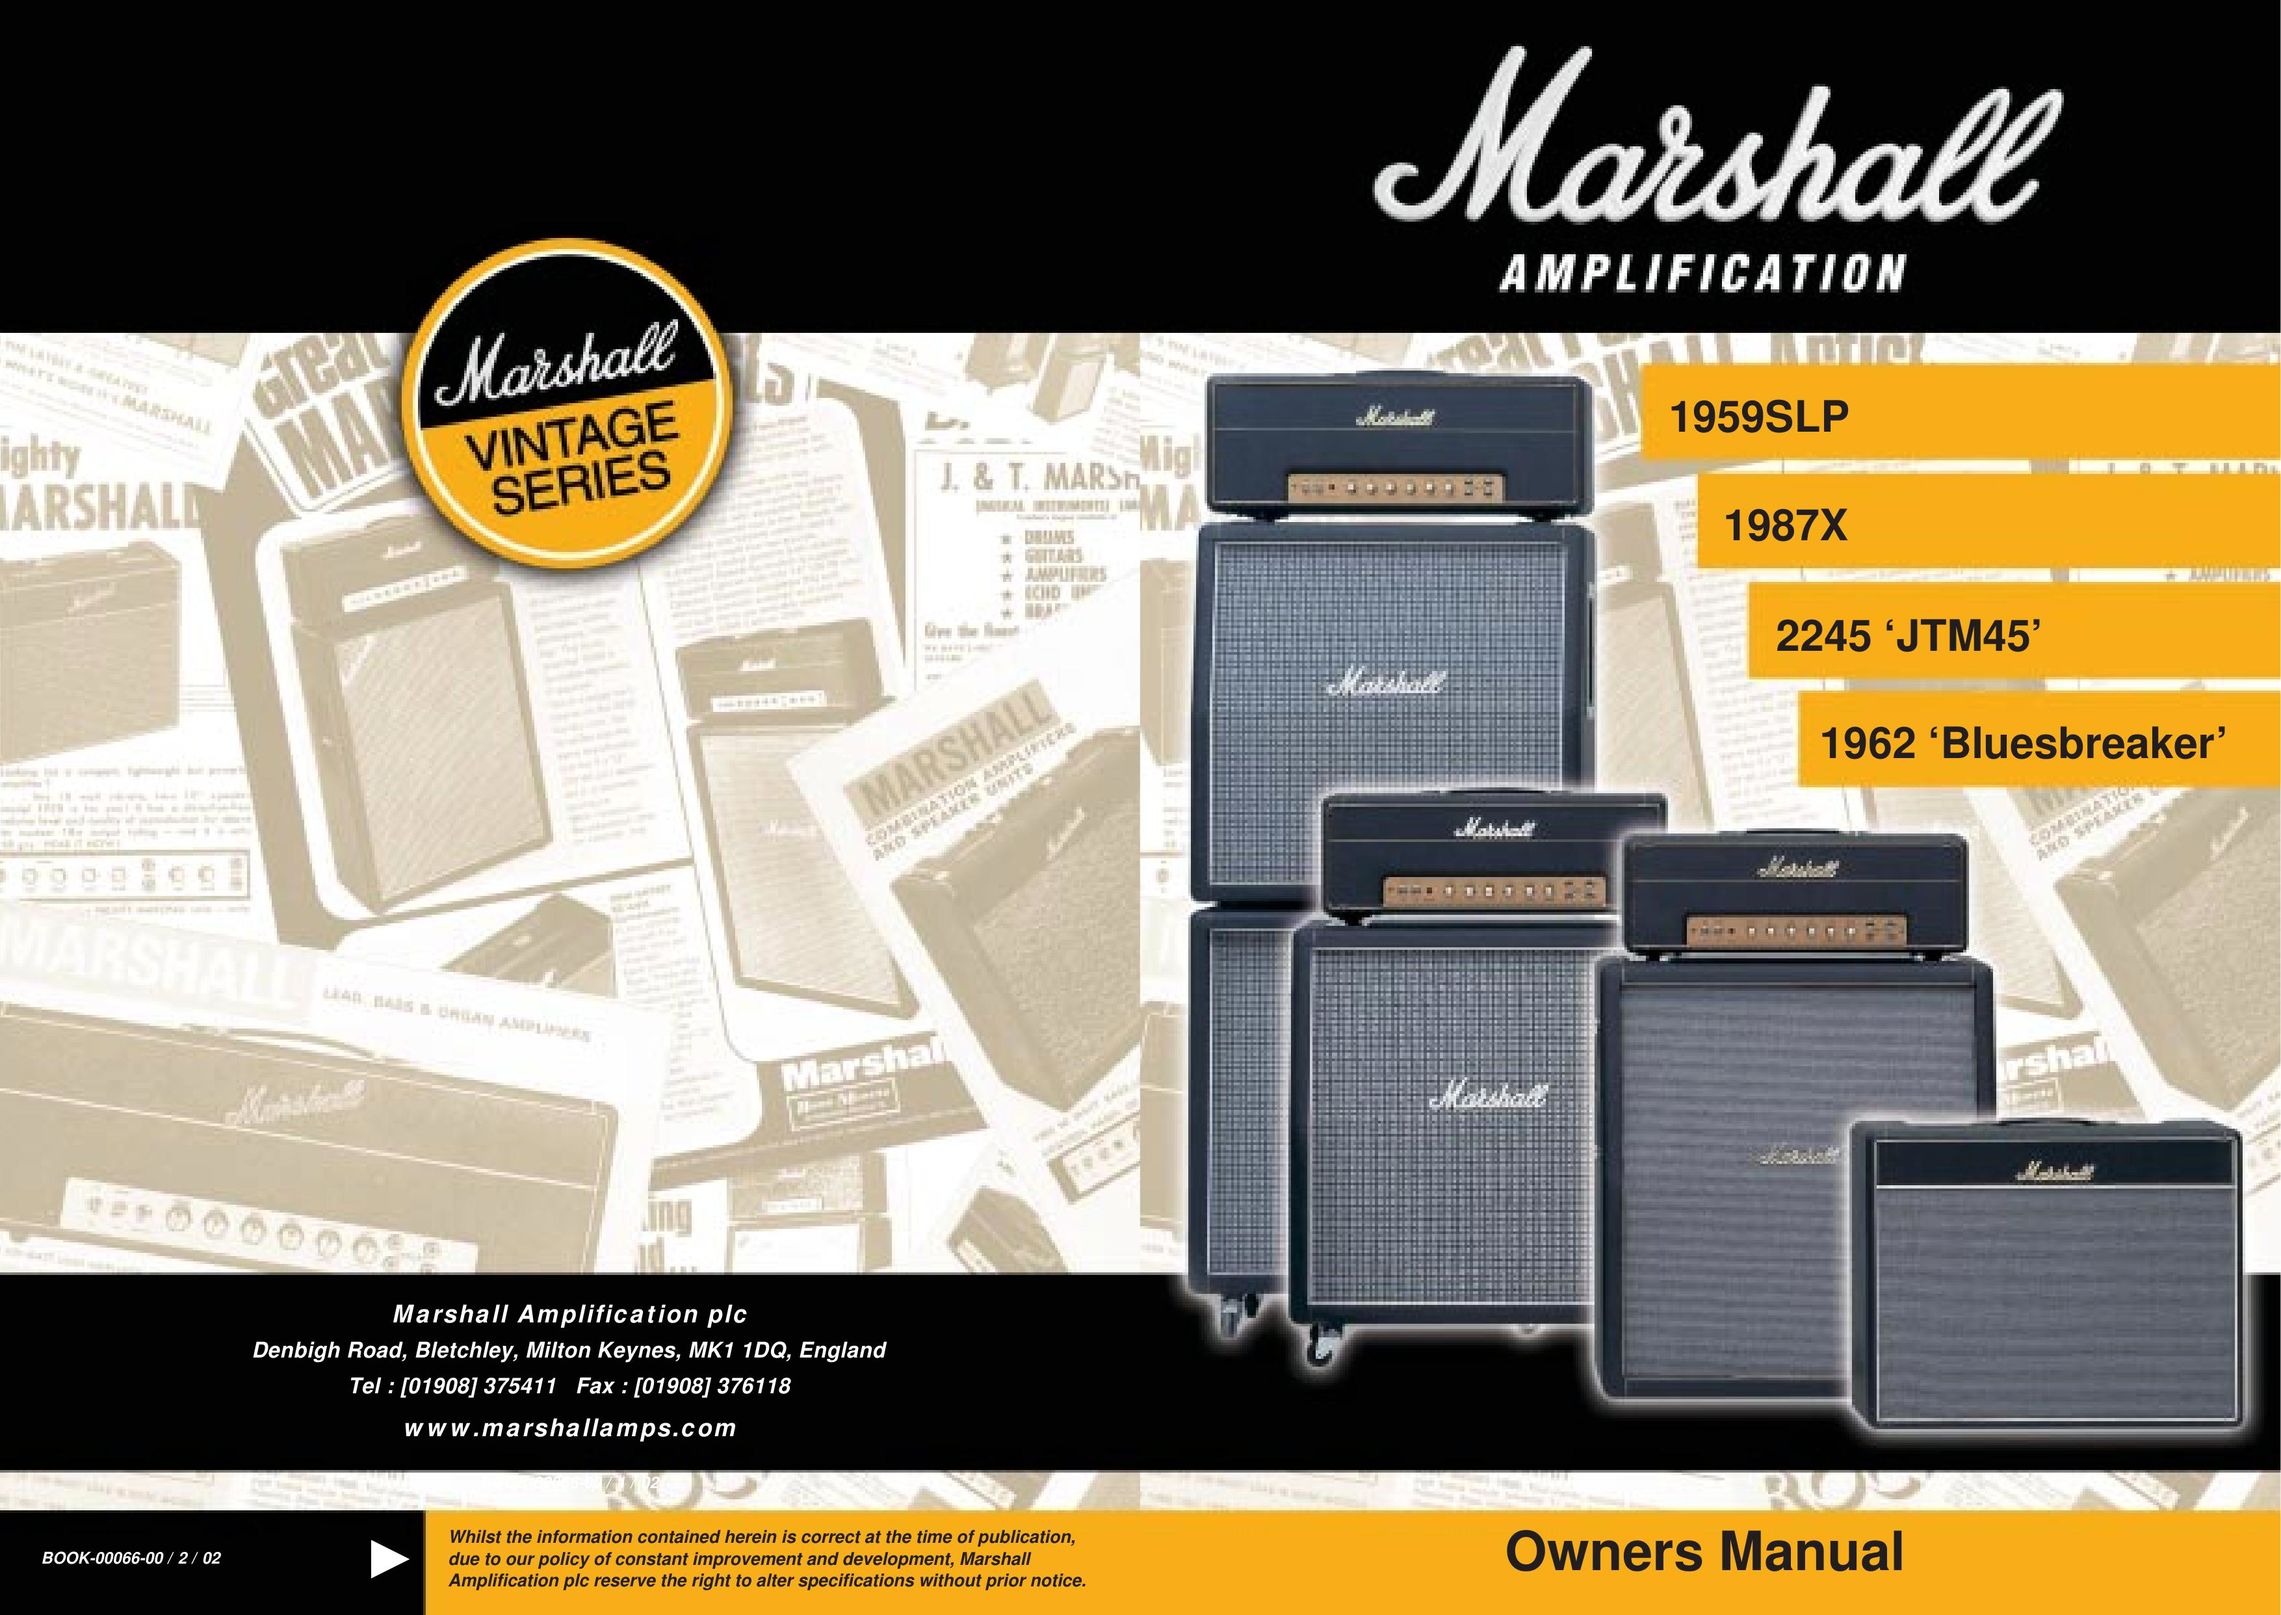 Marshall Amplification 1987X Stereo Amplifier User Manual